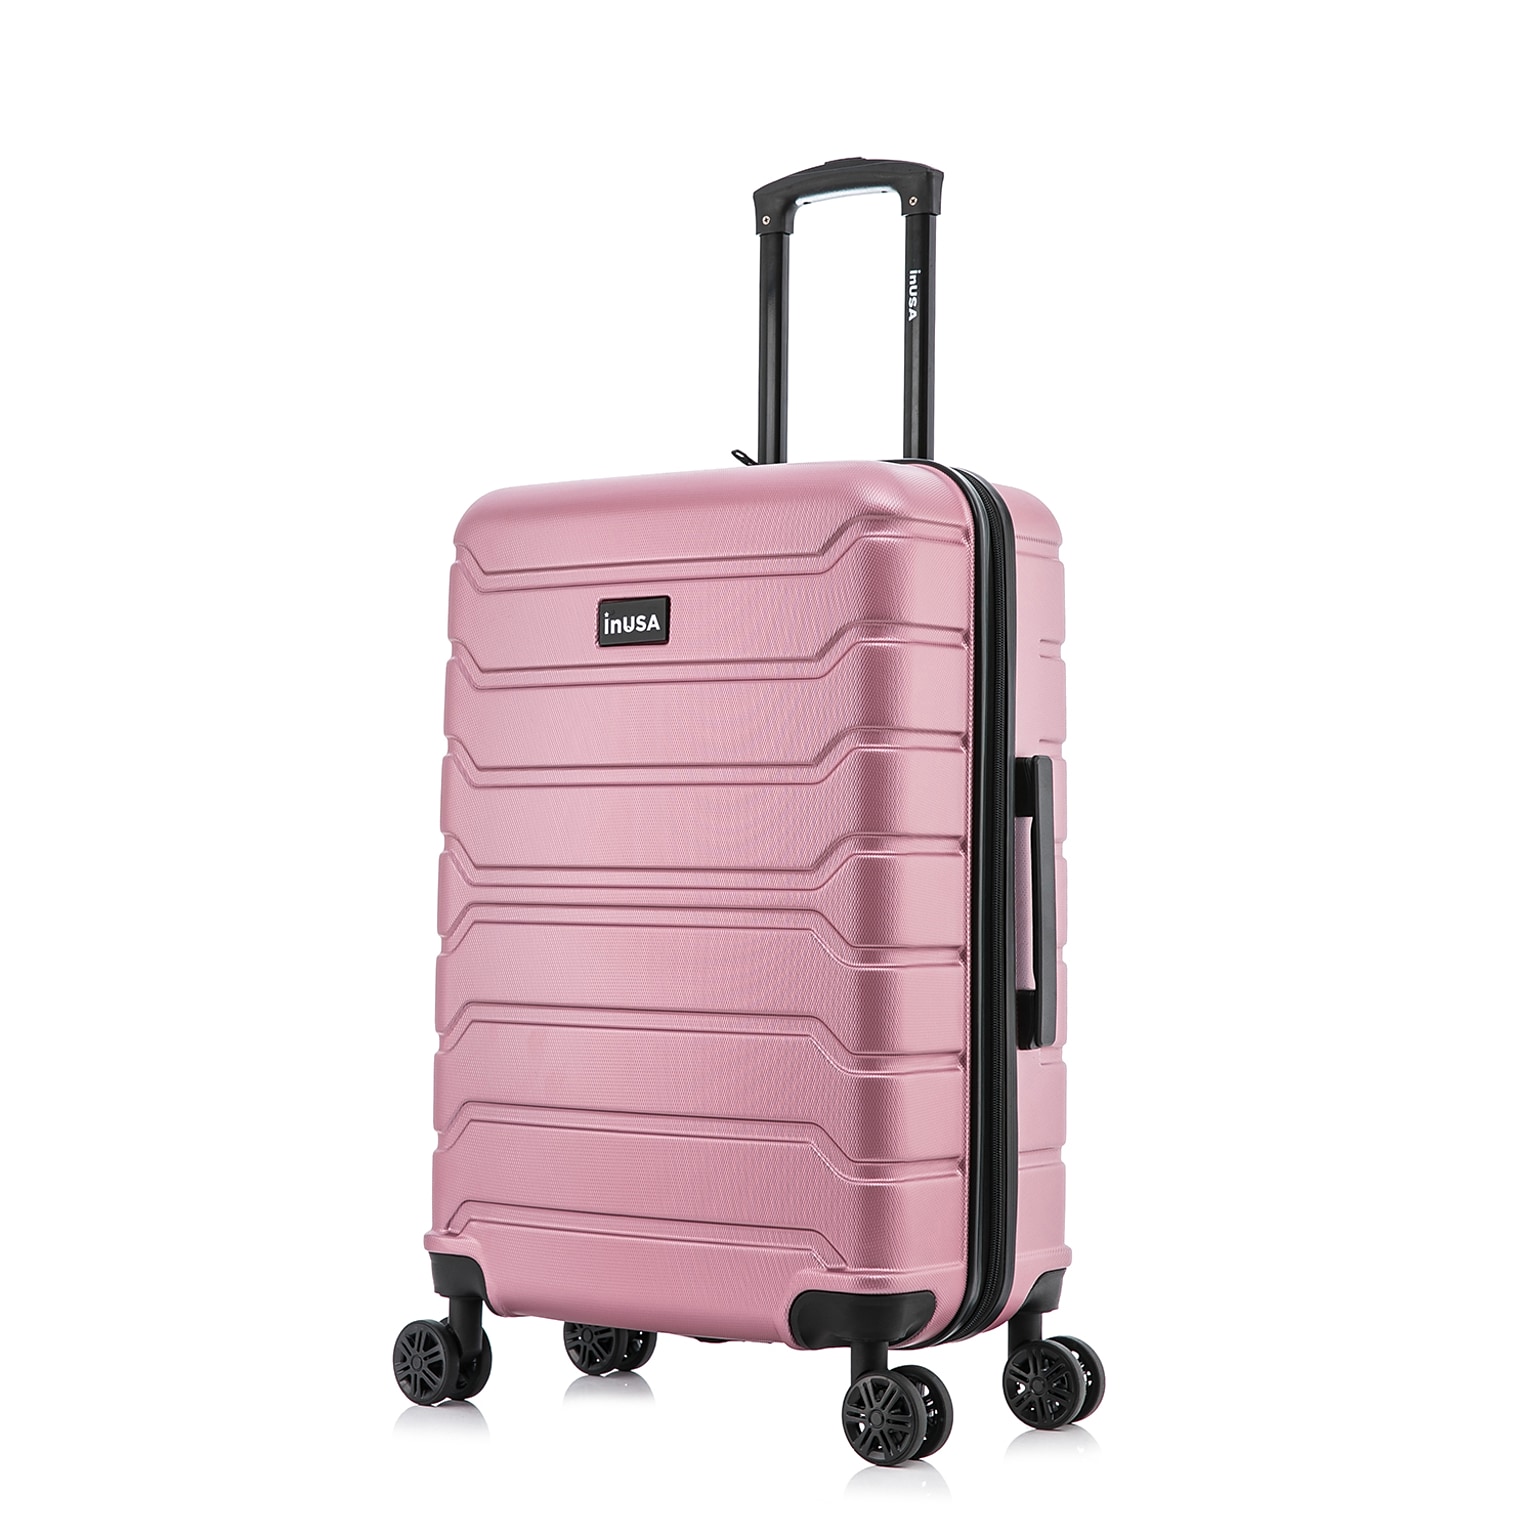 InUSA Trend 27.52 Hardside Suitcase, 4-Wheeled Spinner, Rose Gold (IUTRE00M-ROS)